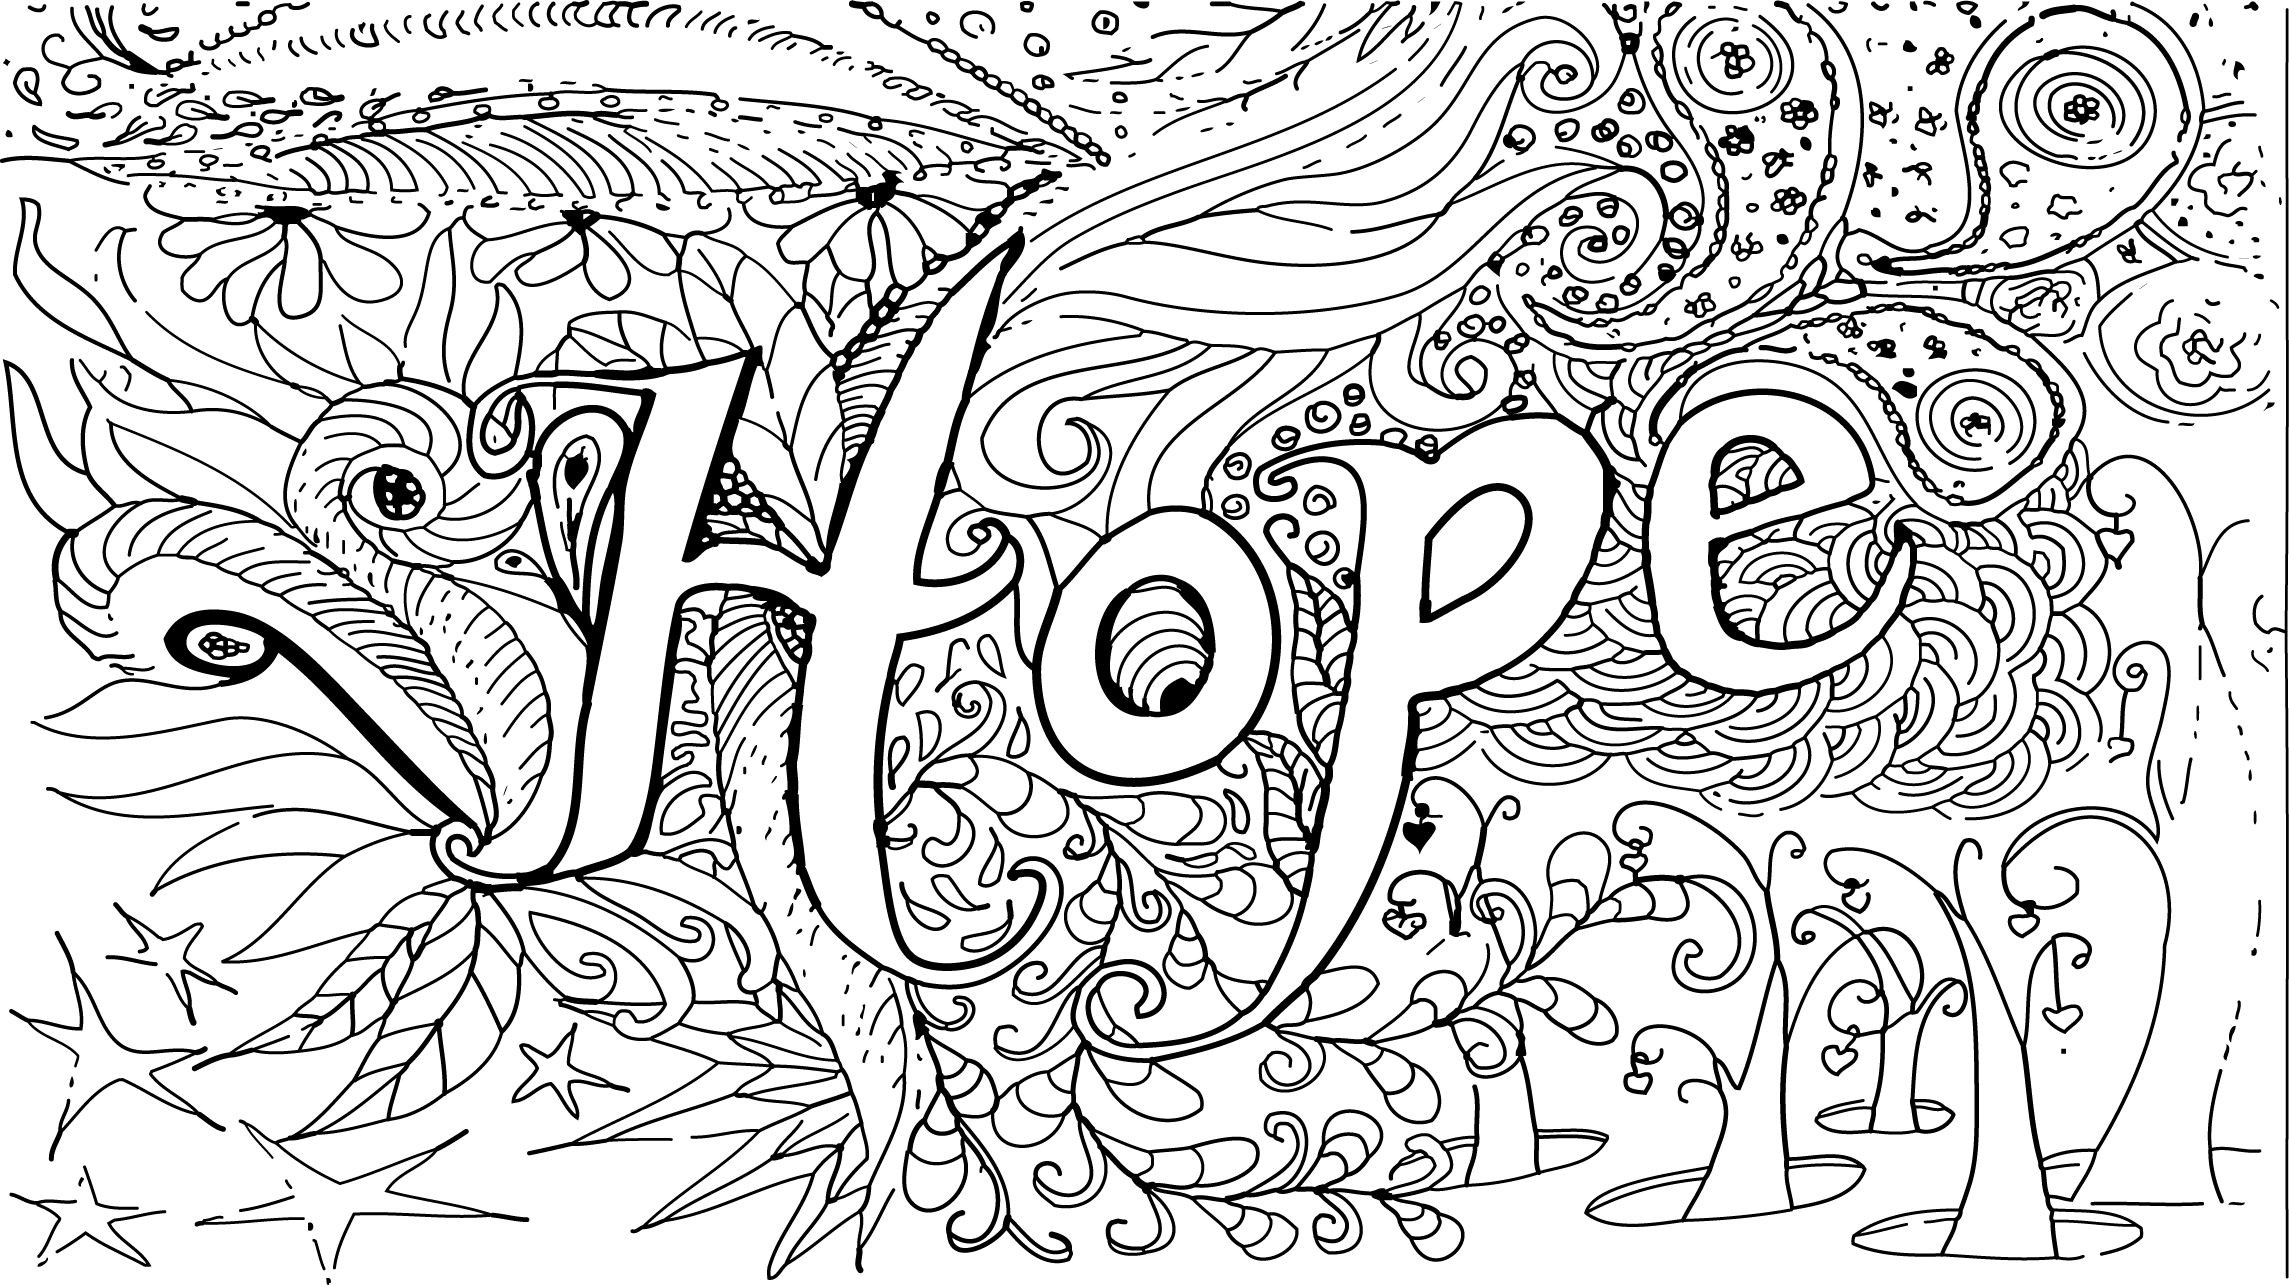 Coloring Pages For Girls Hard
 hard coloring page hope inspiration coloring book free